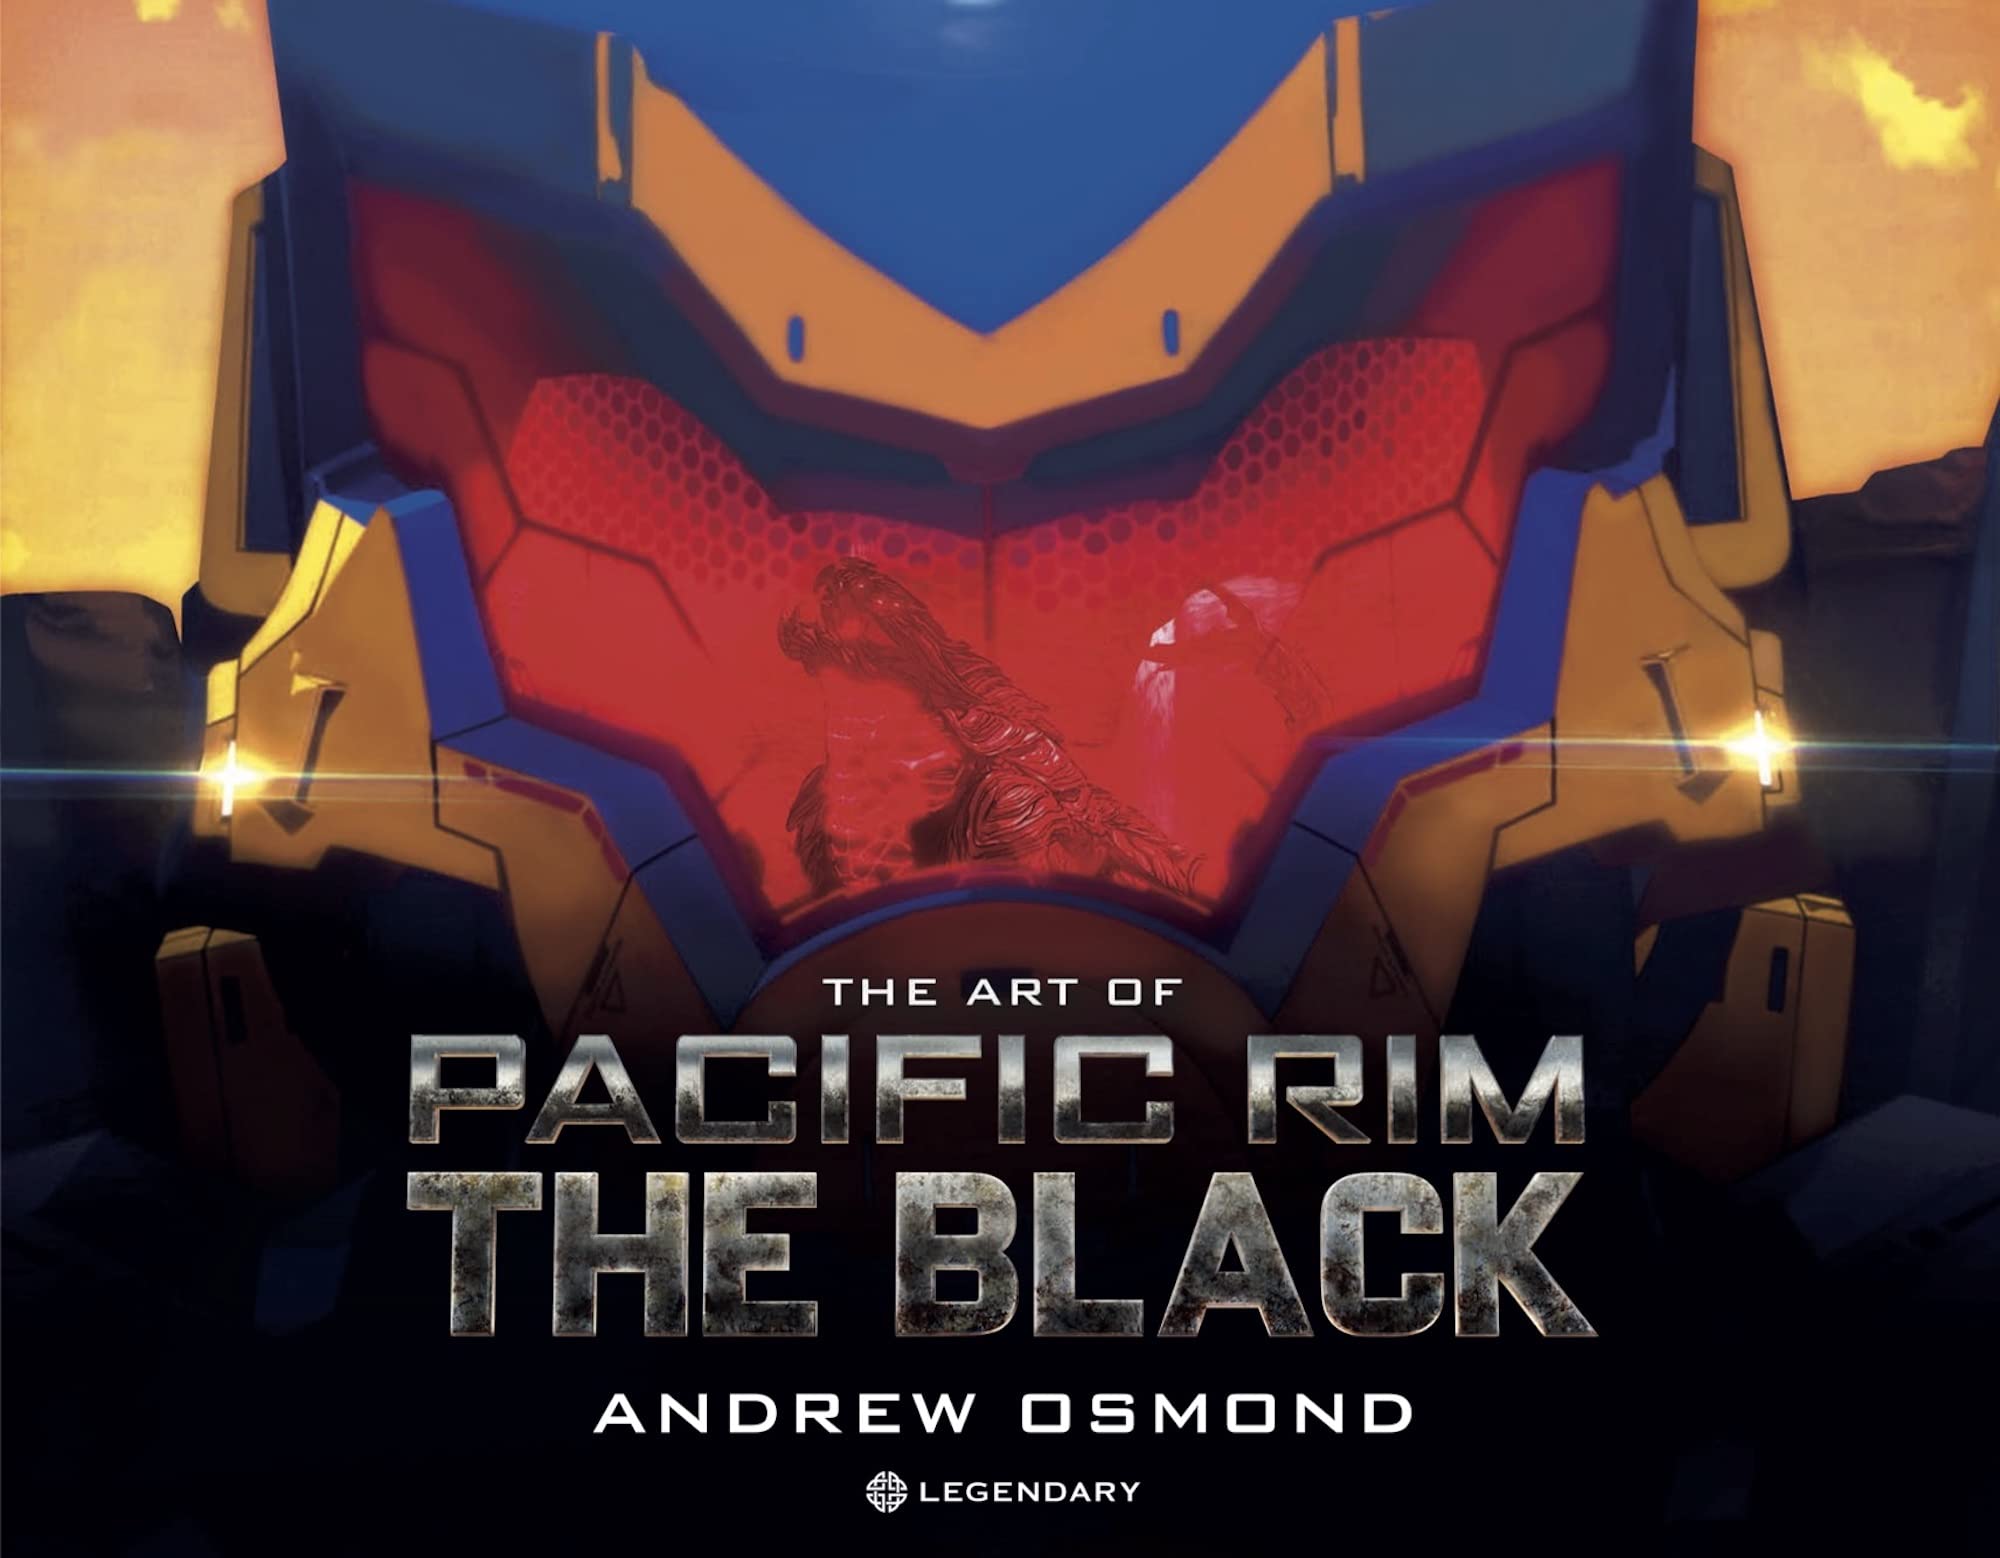 The Art of Pacific Rim: The Black (Hardcover)